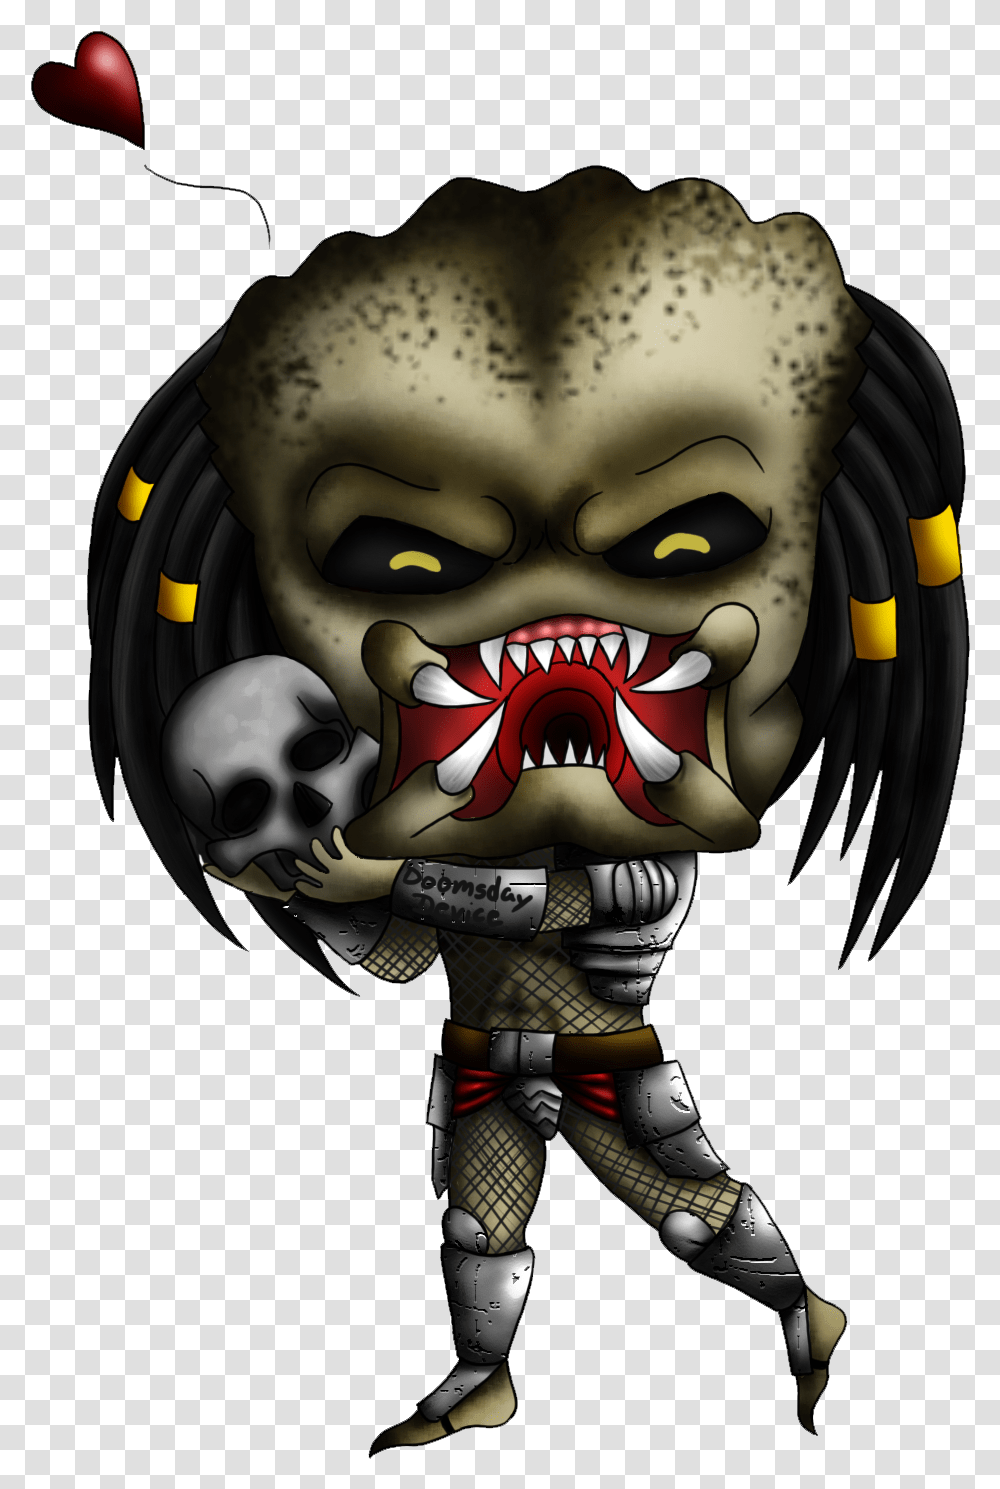 Download Predator Image For Free Cute Chibi Predator, Head, Toy, Mask, Face Transparent Png